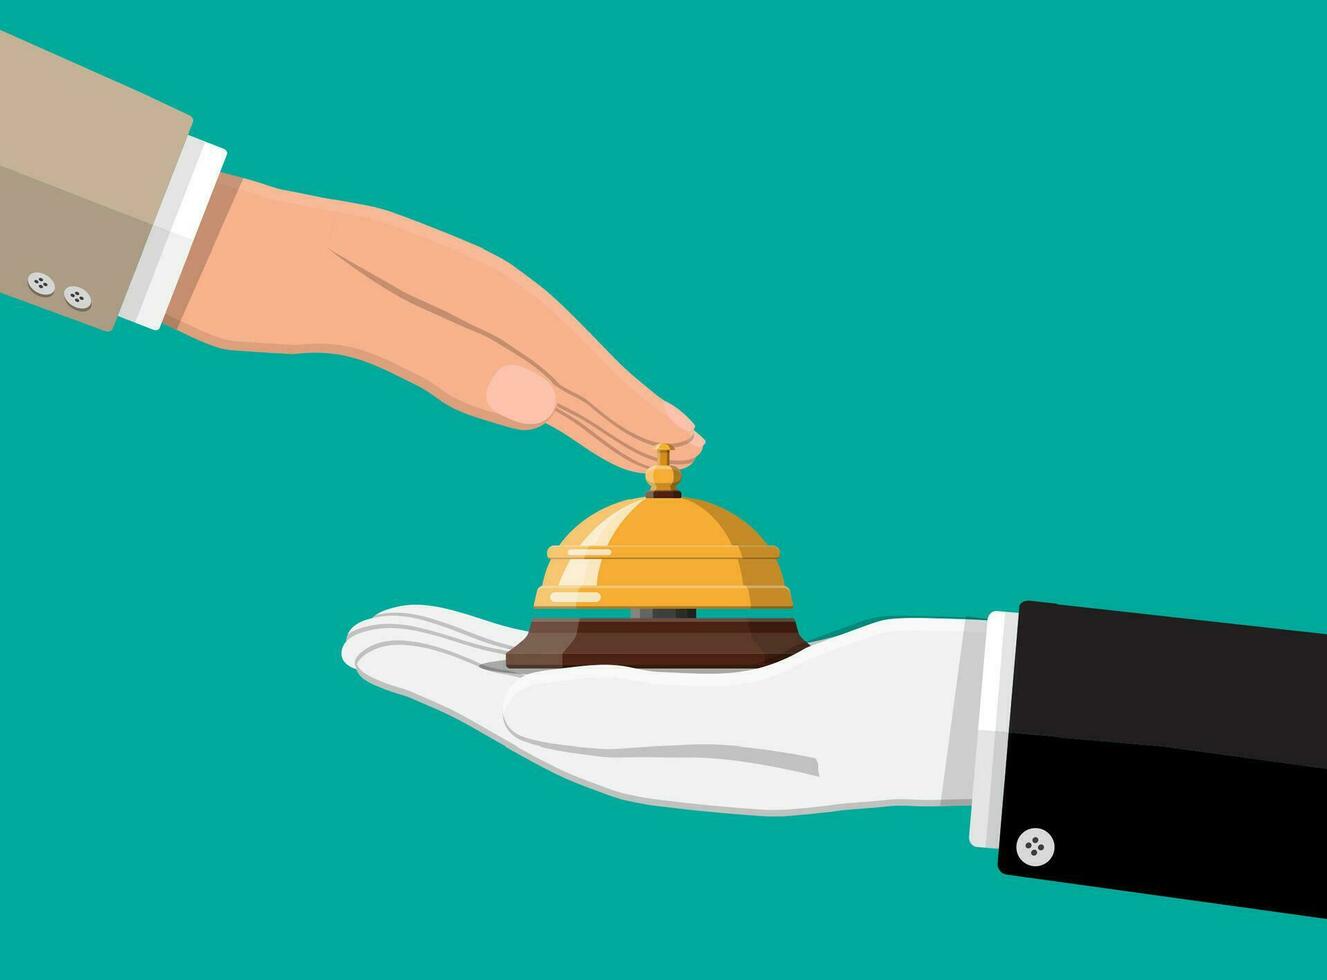 Golden service bell in hand. Help, alarm and support concept. Hotel, hospital, reception, lobby and concierge. Vector illustration in flat style